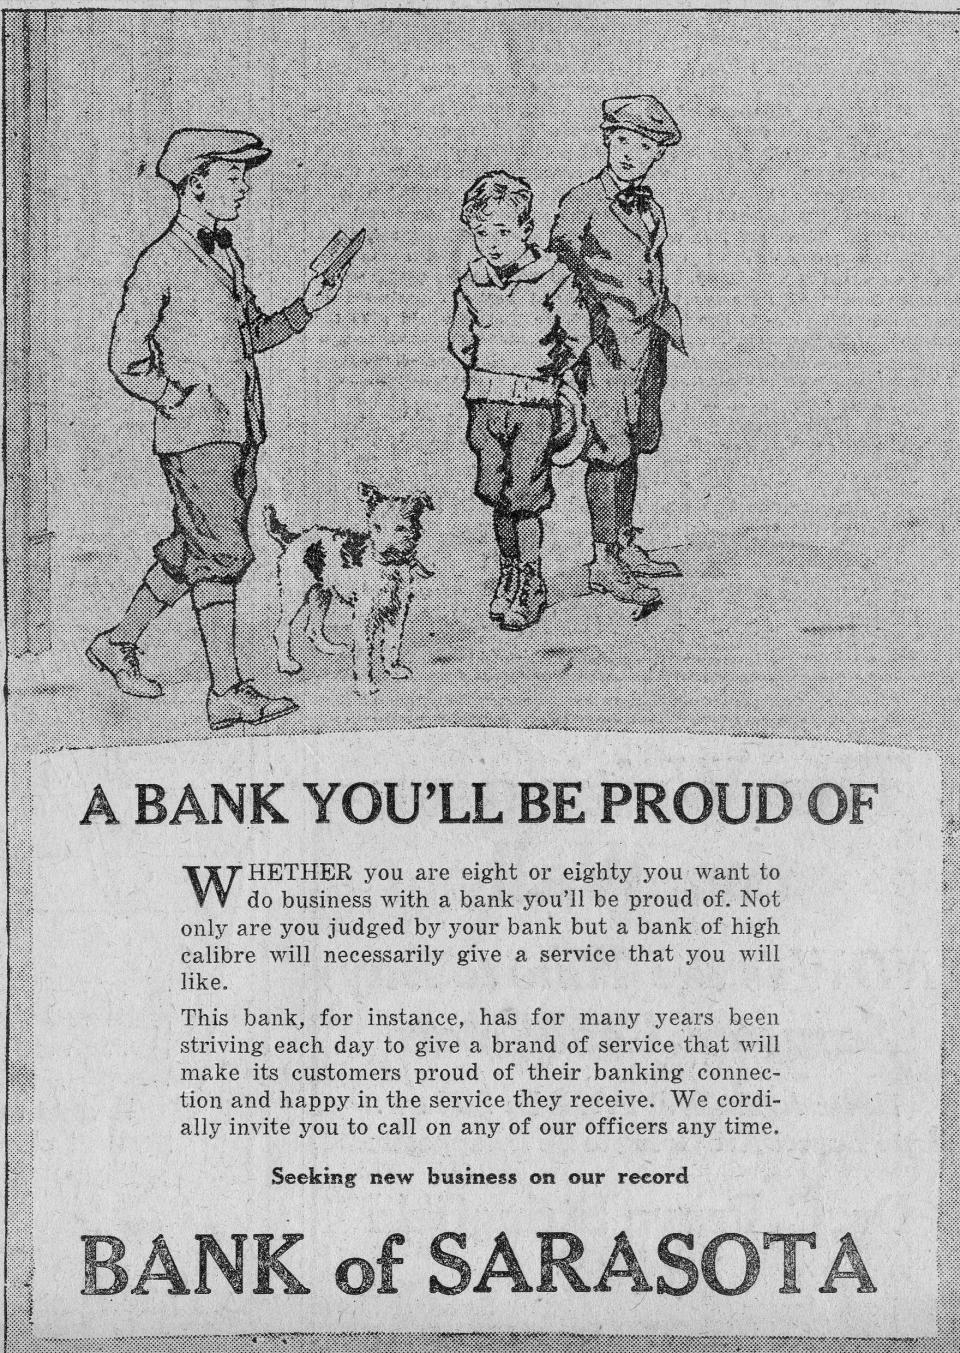 A full-page advertisement for the Bank of Sarasota in an early issue of the Sarasota Herald.